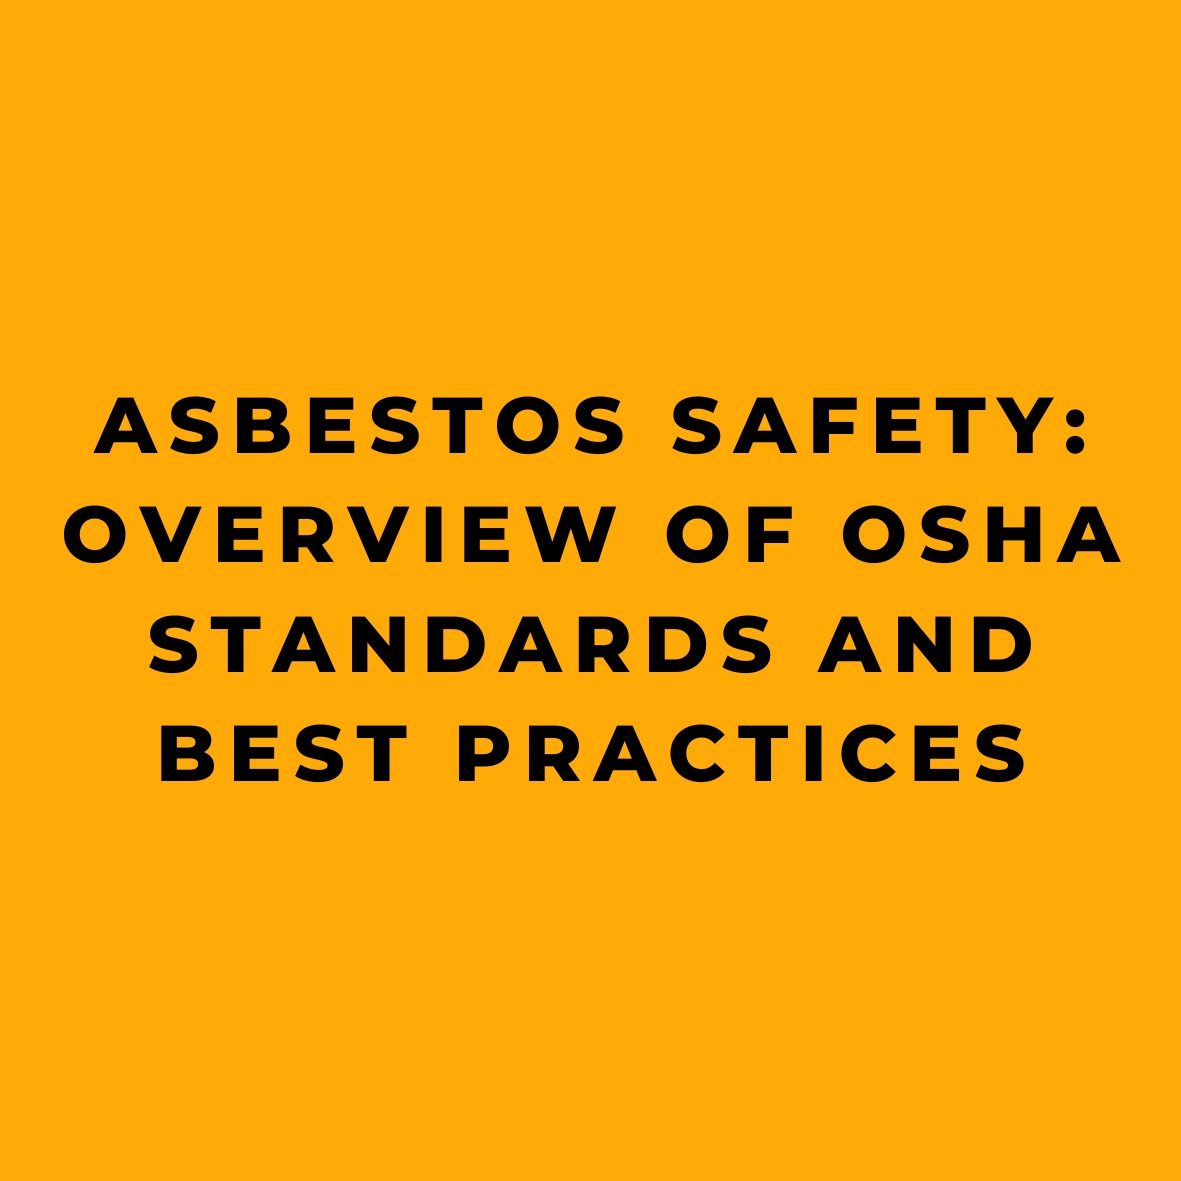 Asbestos Safety Overview of OSHA Standards and Best Practices